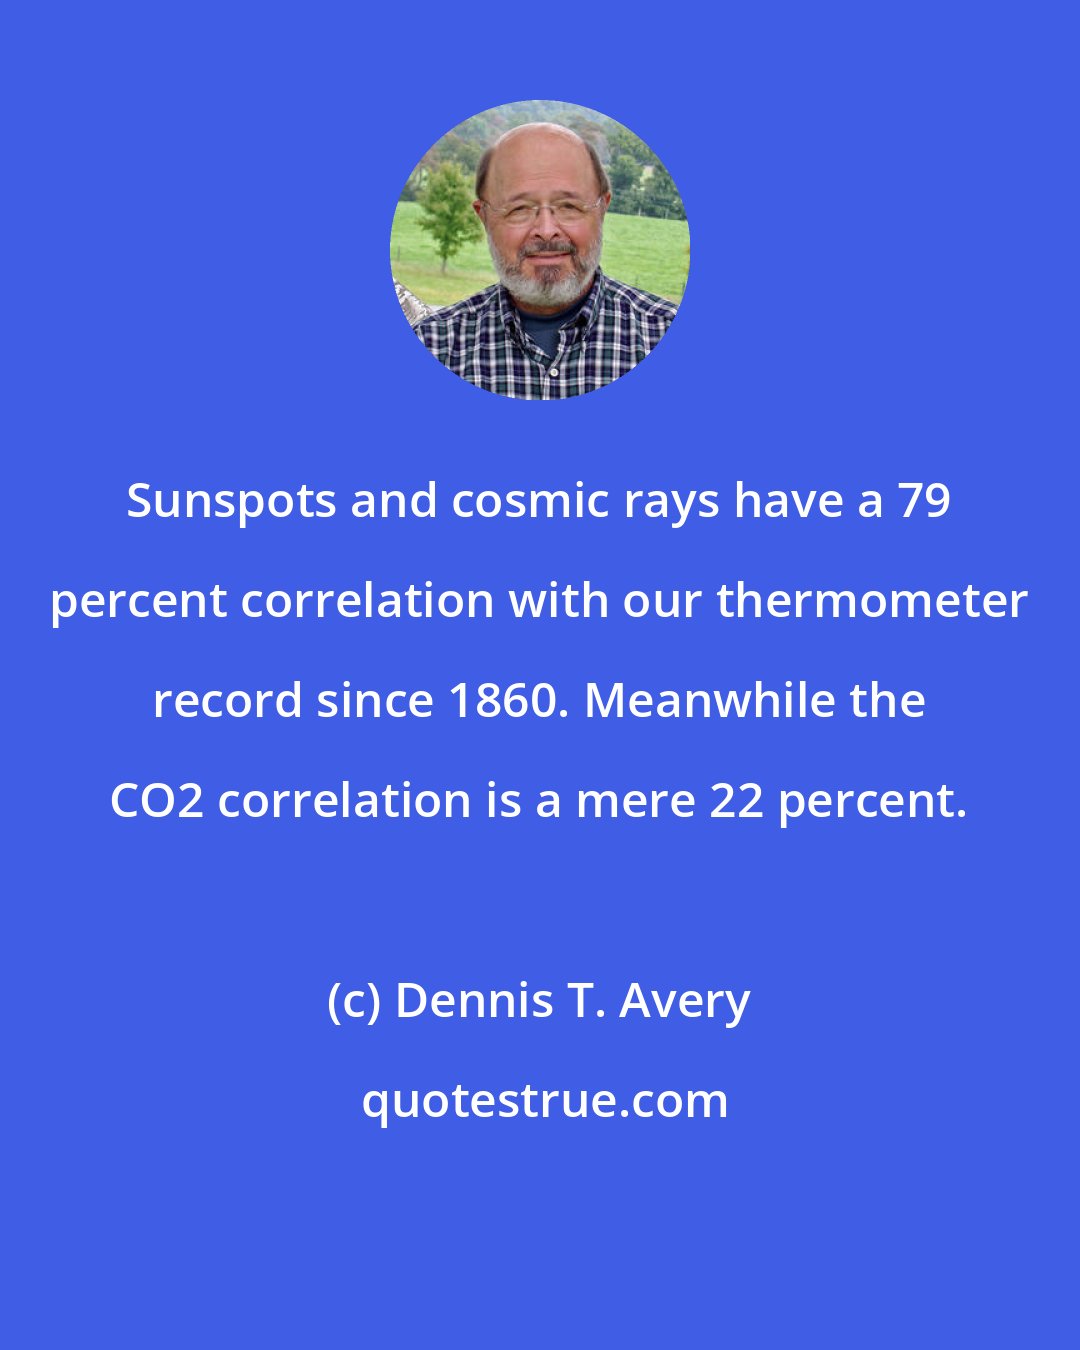 Dennis T. Avery: Sunspots and cosmic rays have a 79 percent correlation with our thermometer record since 1860. Meanwhile the CO2 correlation is a mere 22 percent.